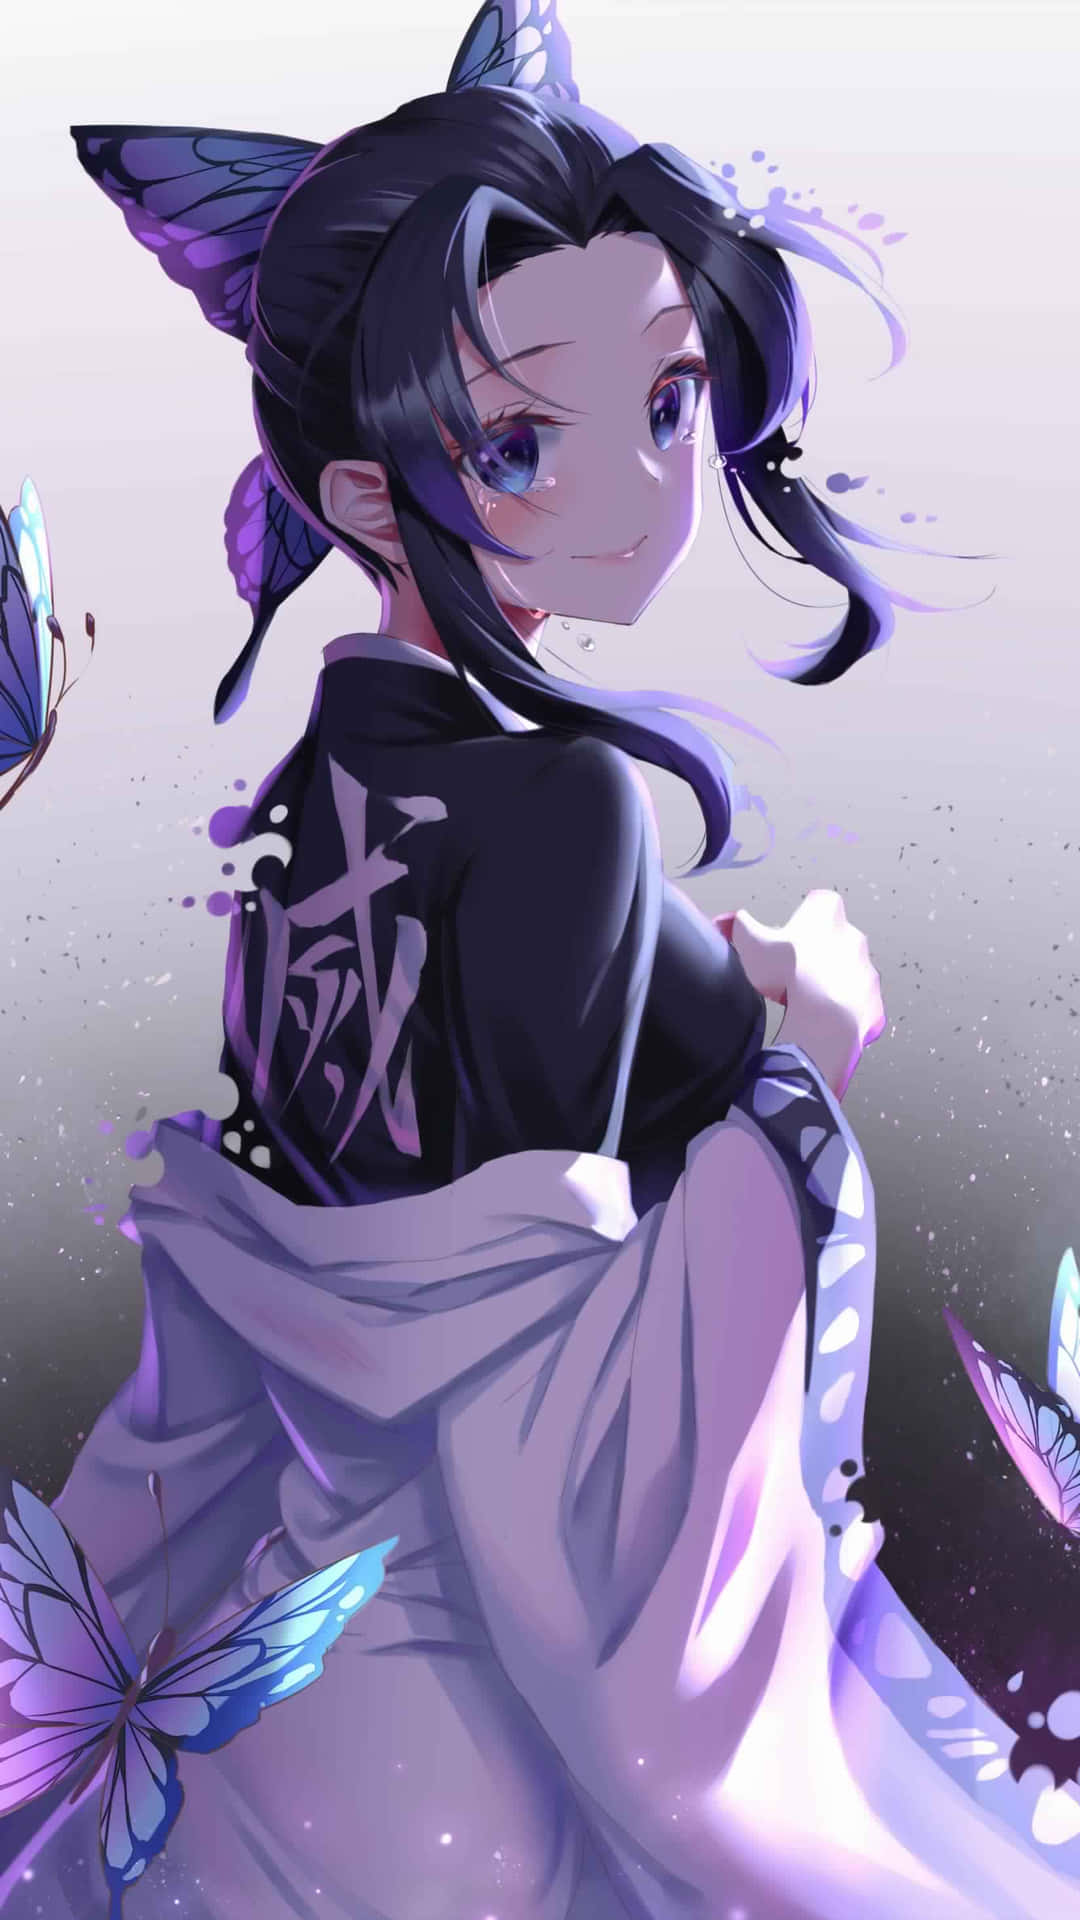 Rejuvenate your iPhone with this unique Cool Anime iPhone Wallpaper Wallpaper